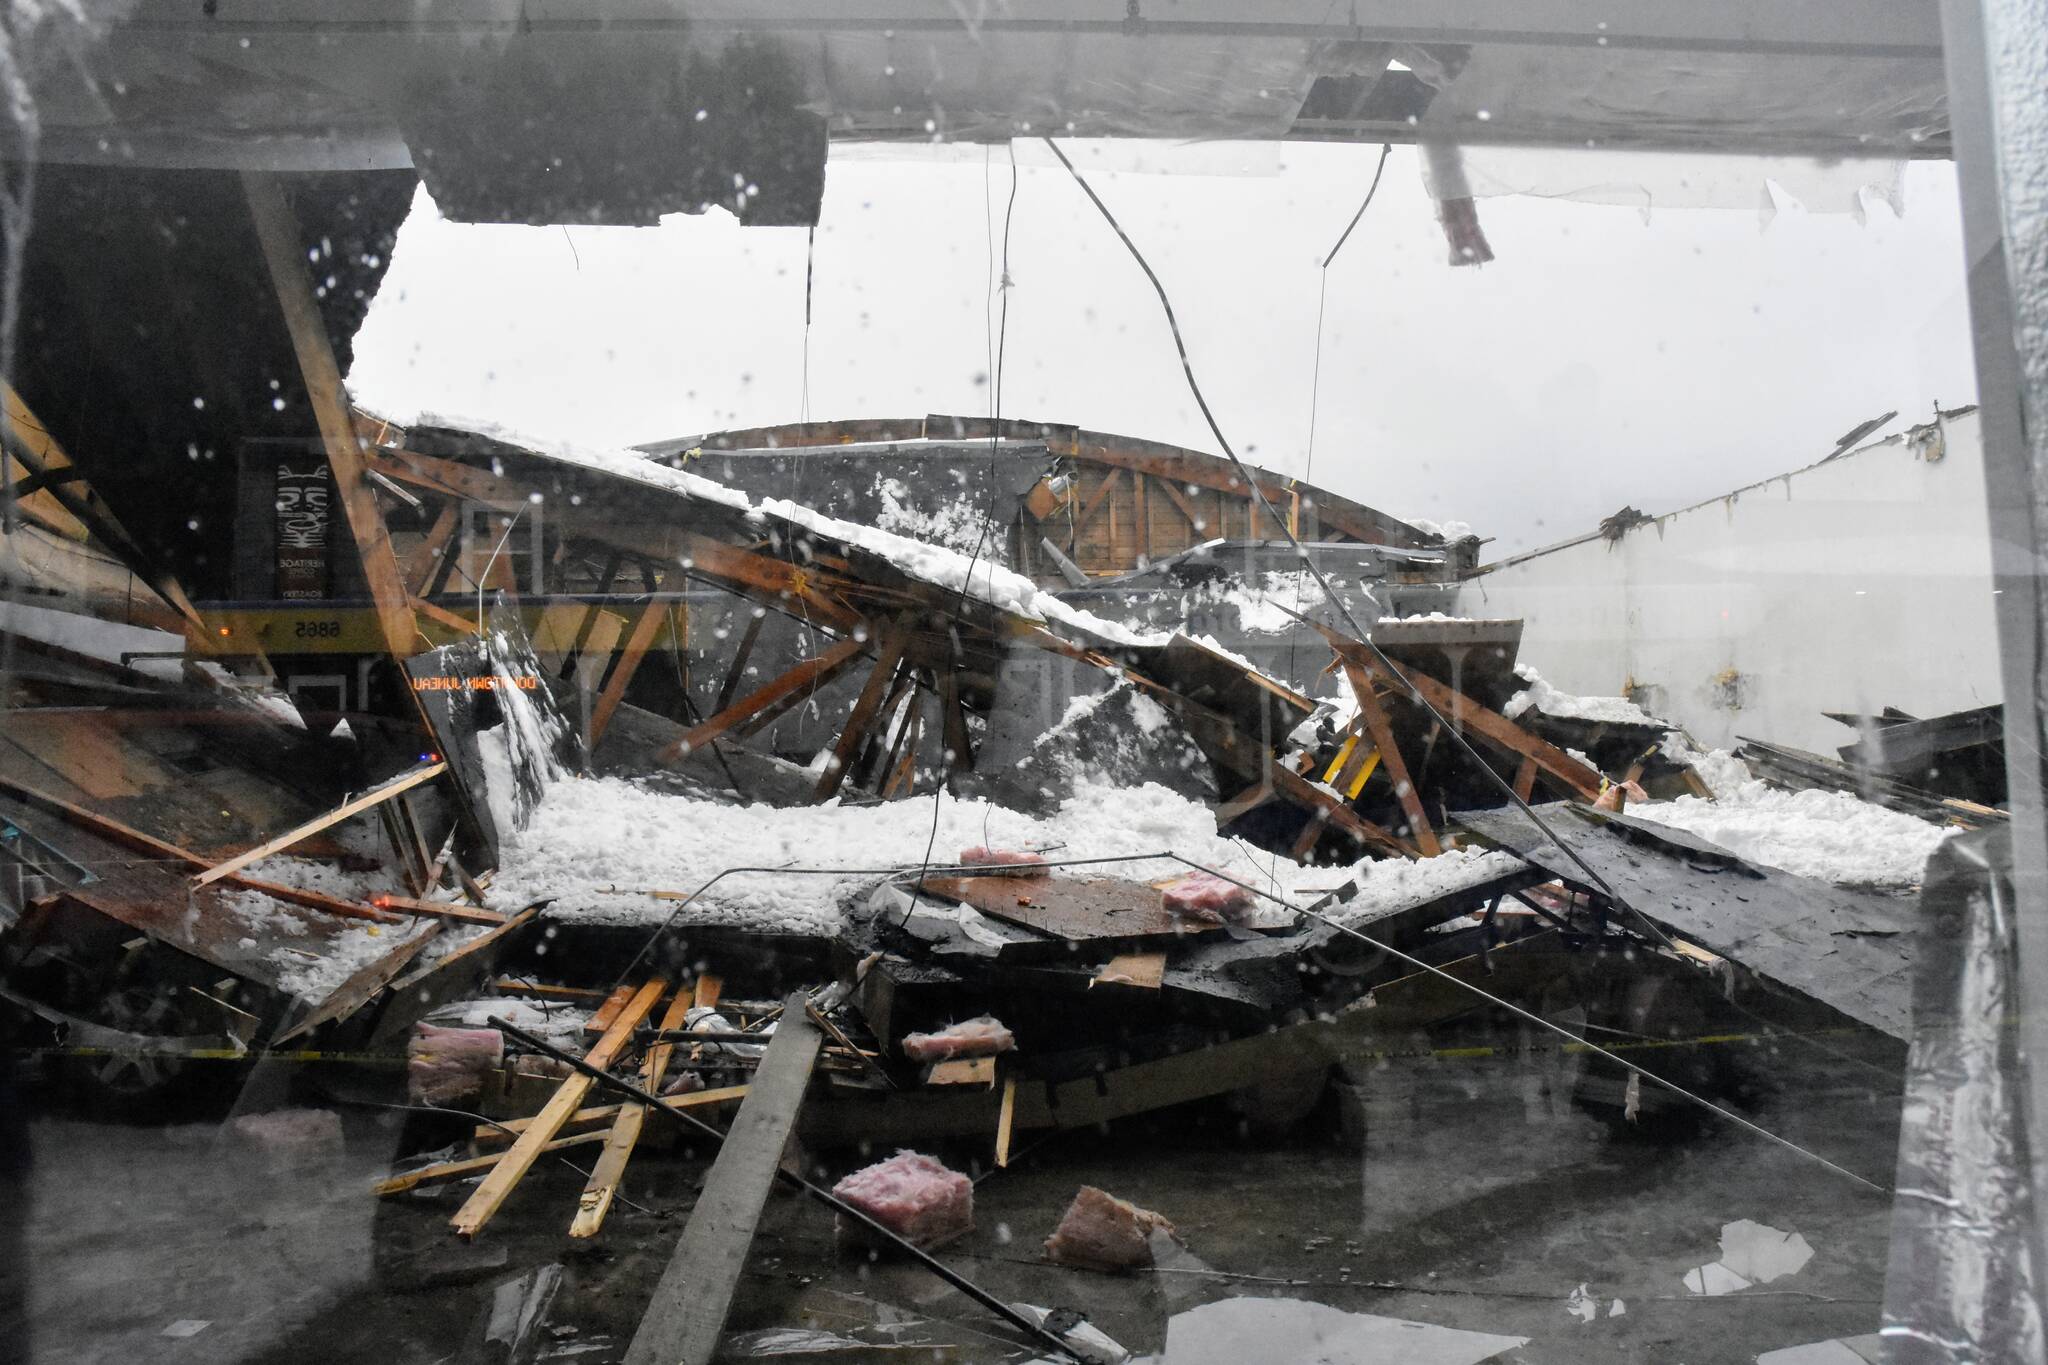 The roof of a building on Willoughby Avenue in downtown Juneau collapsed Tuesday, Jan. 11, 2022, one of two buildings in the city to fall in amid continuing rain following heavy snowfall. No injuries were reported at either location. (Peter Segall / Juneau Empire)